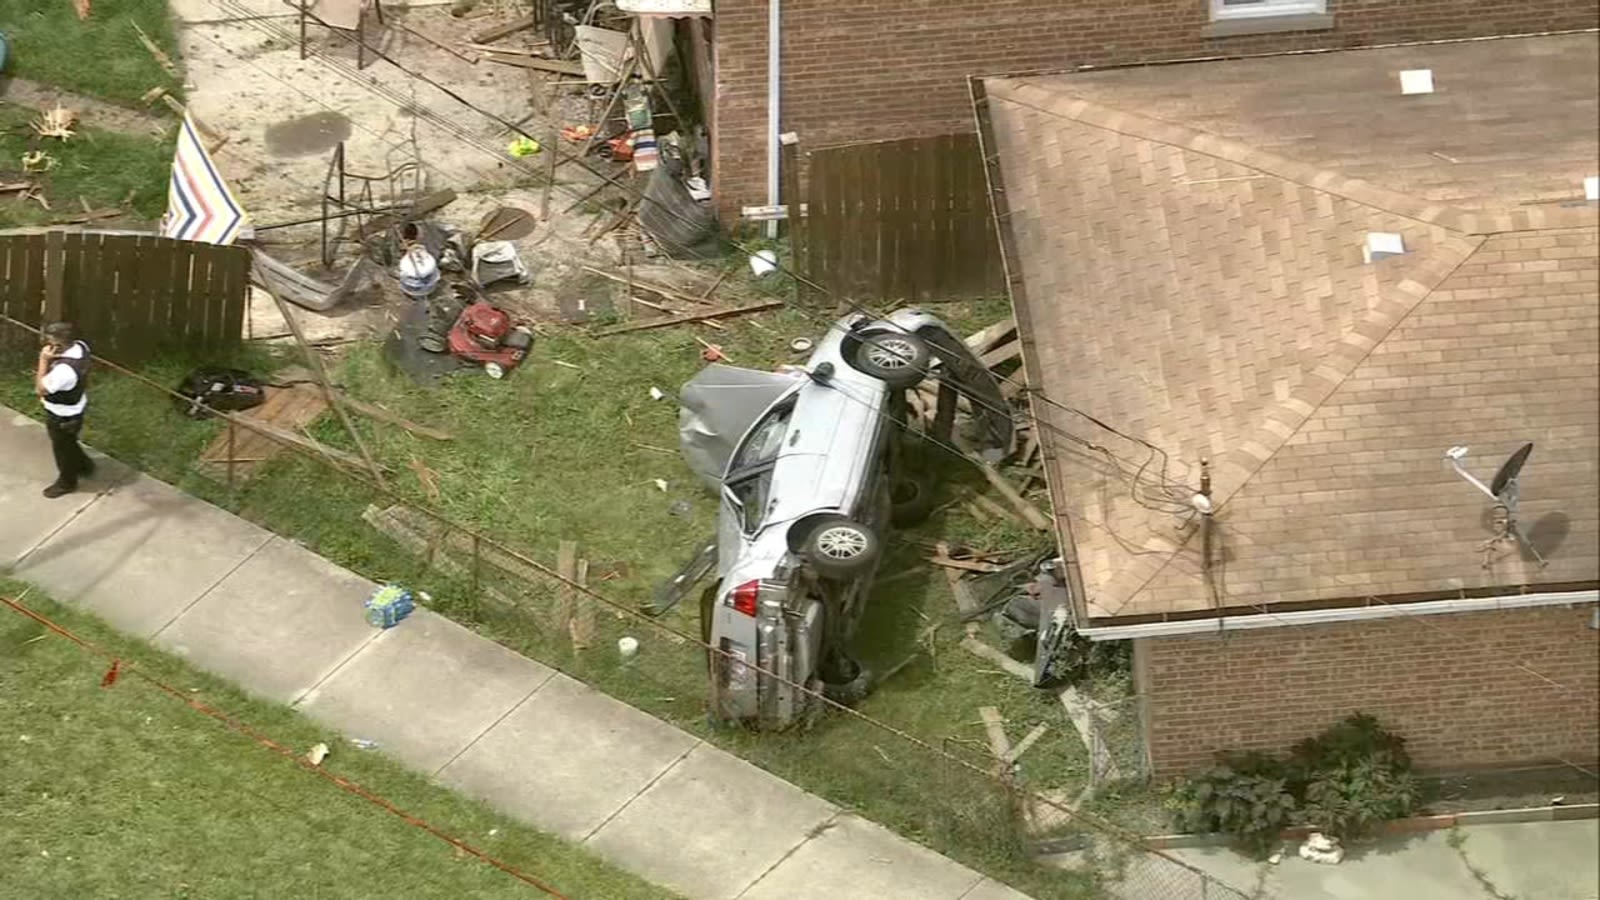 5 hospitalized, including child in critical condition, when car crashes into Ashburn home: CFD